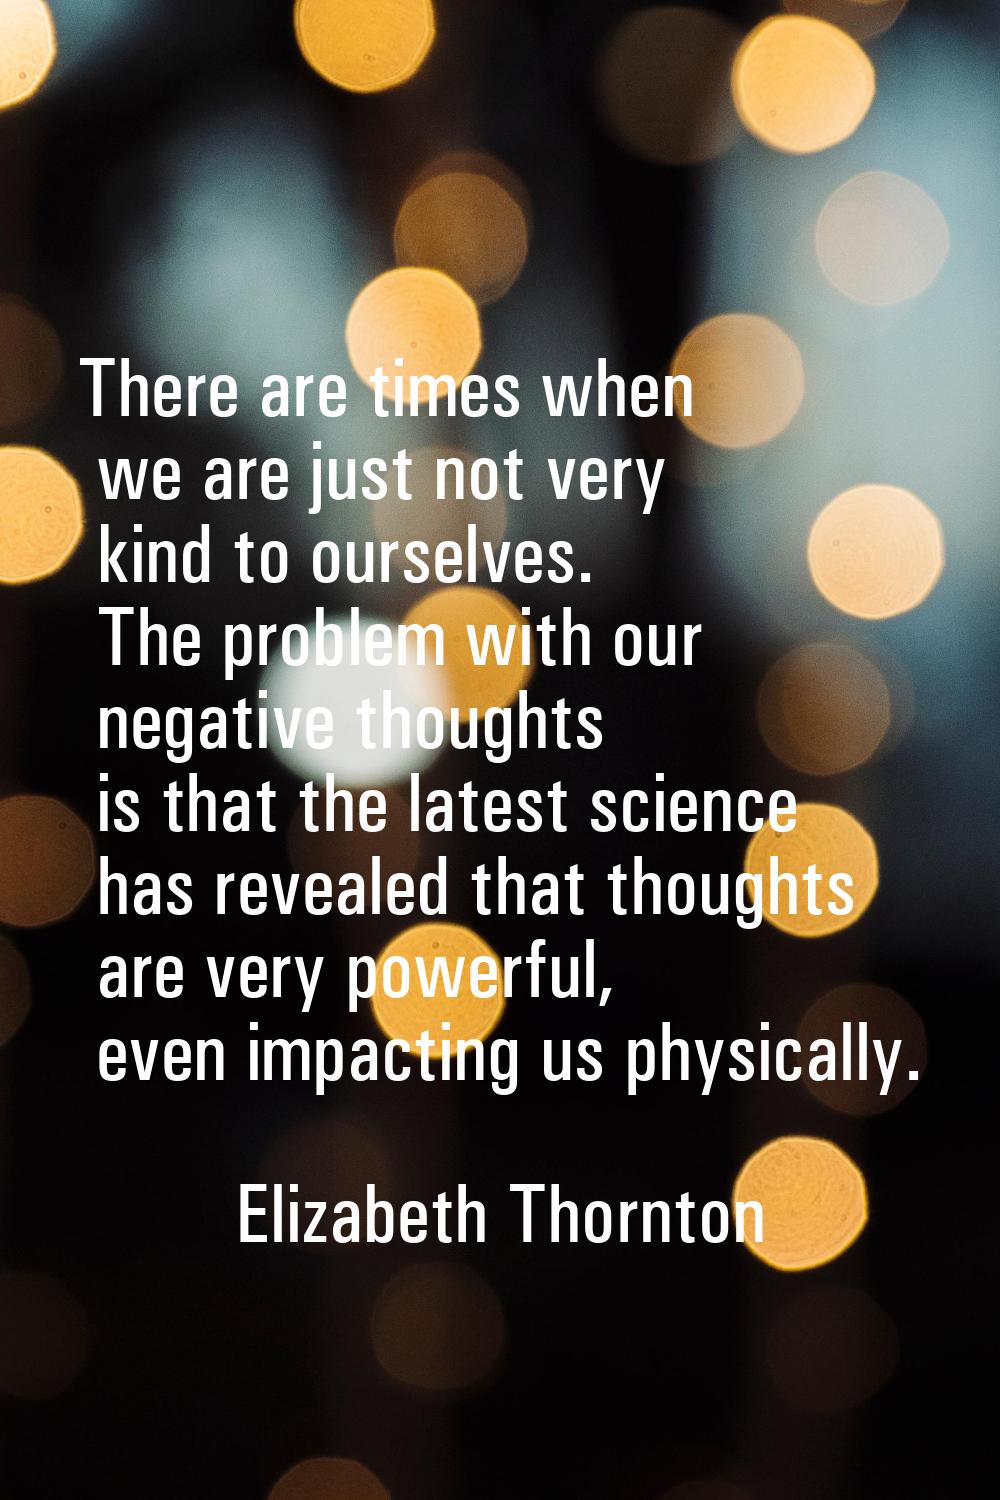 There are times when we are just not very kind to ourselves. The problem with our negative thoughts